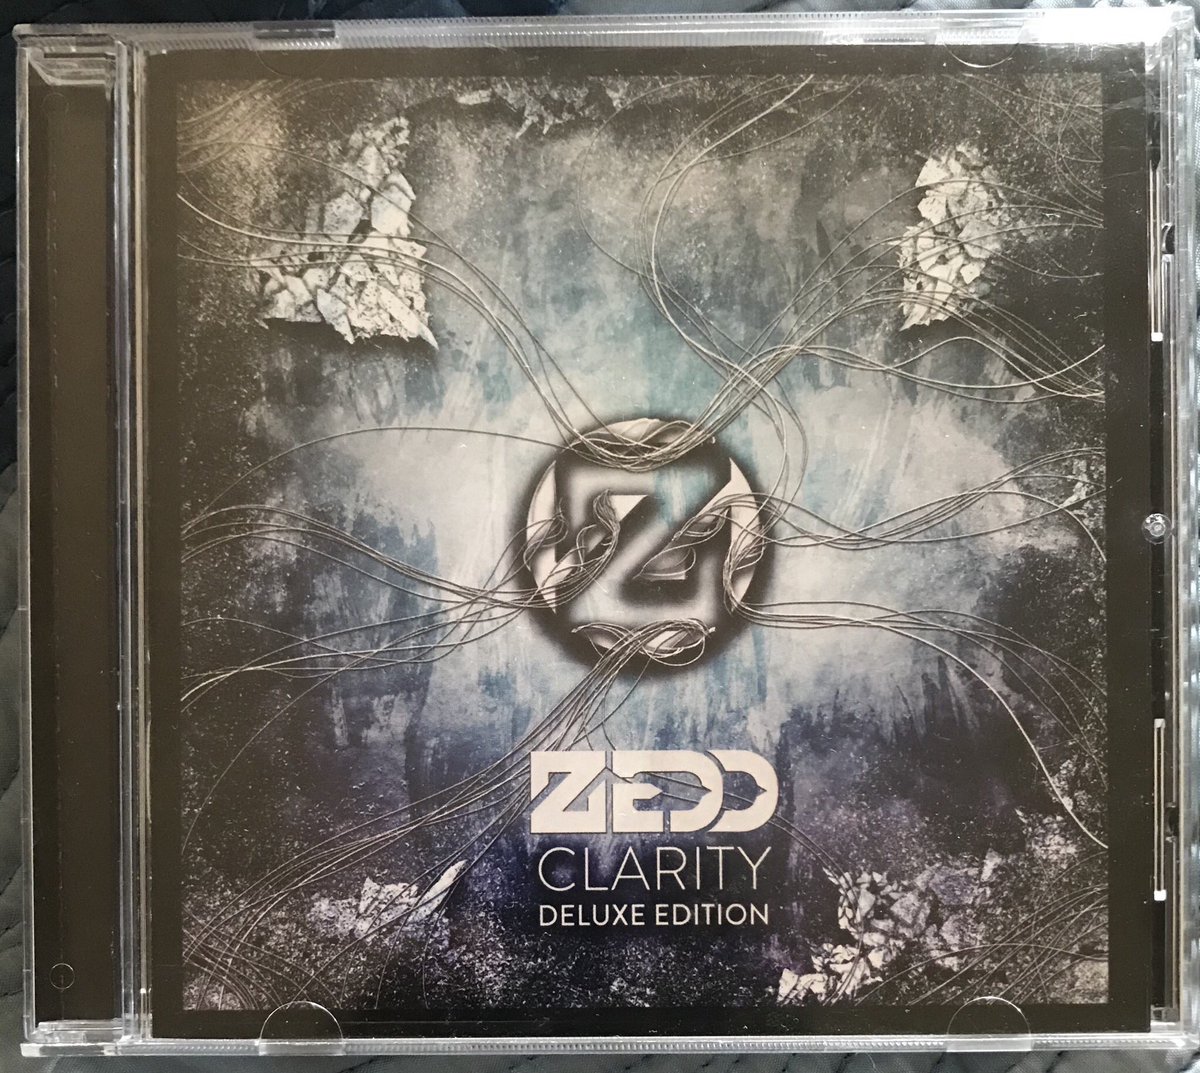 #4: Zedd’s Clarity (The Deluxe Edition). This album was my alarm for a whole school year during High School  really wakes you up 